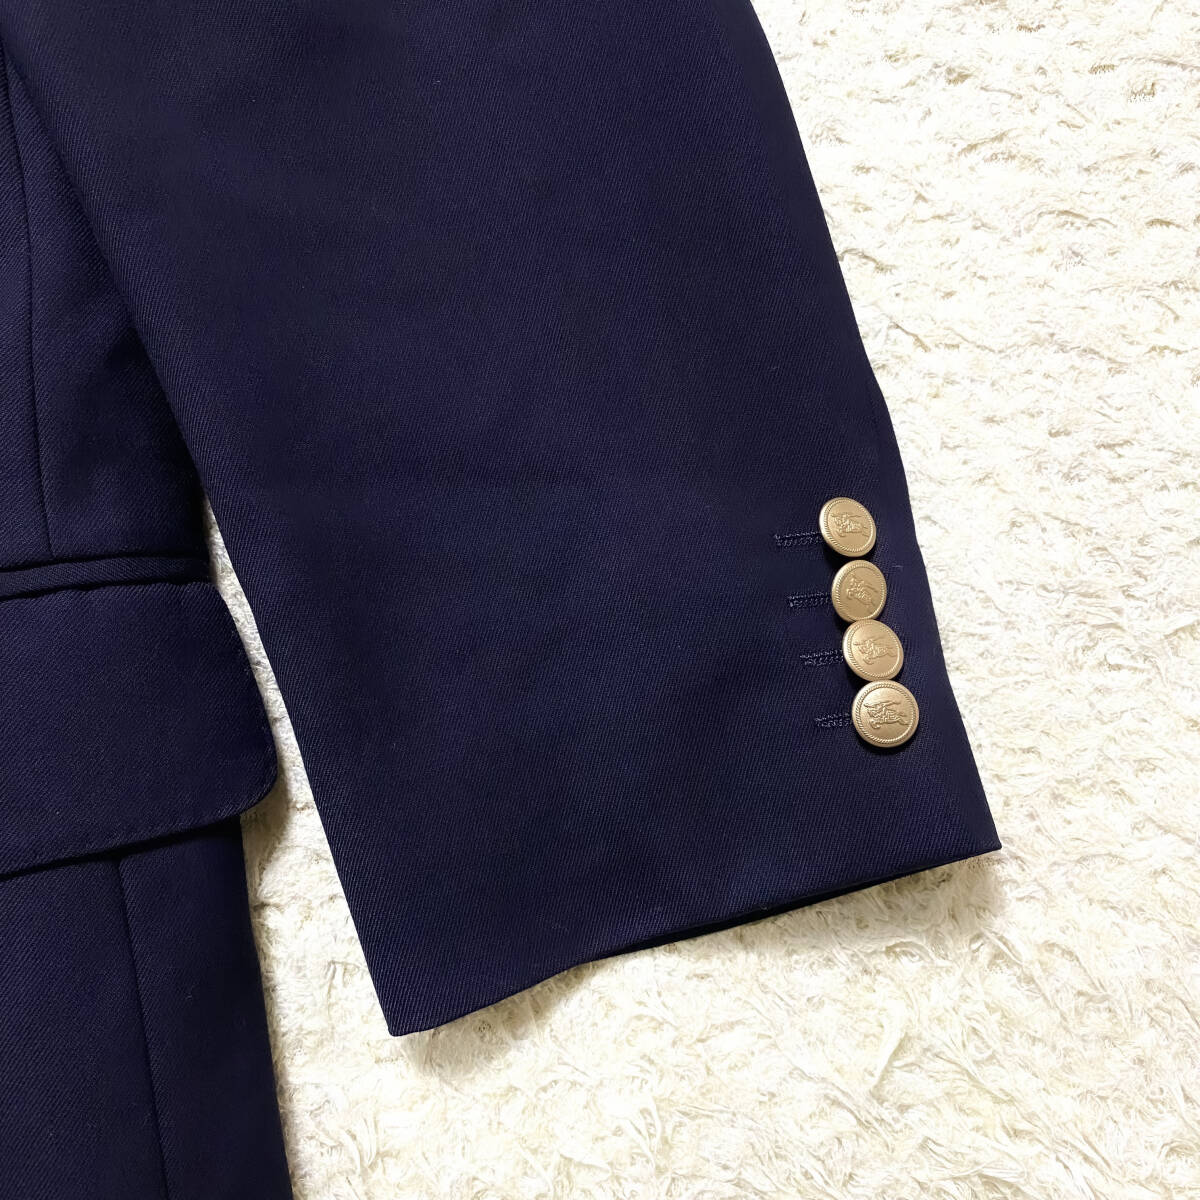  beautiful goods gold .BURBERRY LONDON tailored jacket cashmere go in XL.LL~L gold metal button BB6 hose Logo pattern navy navy blue blaser large . Burberry London 